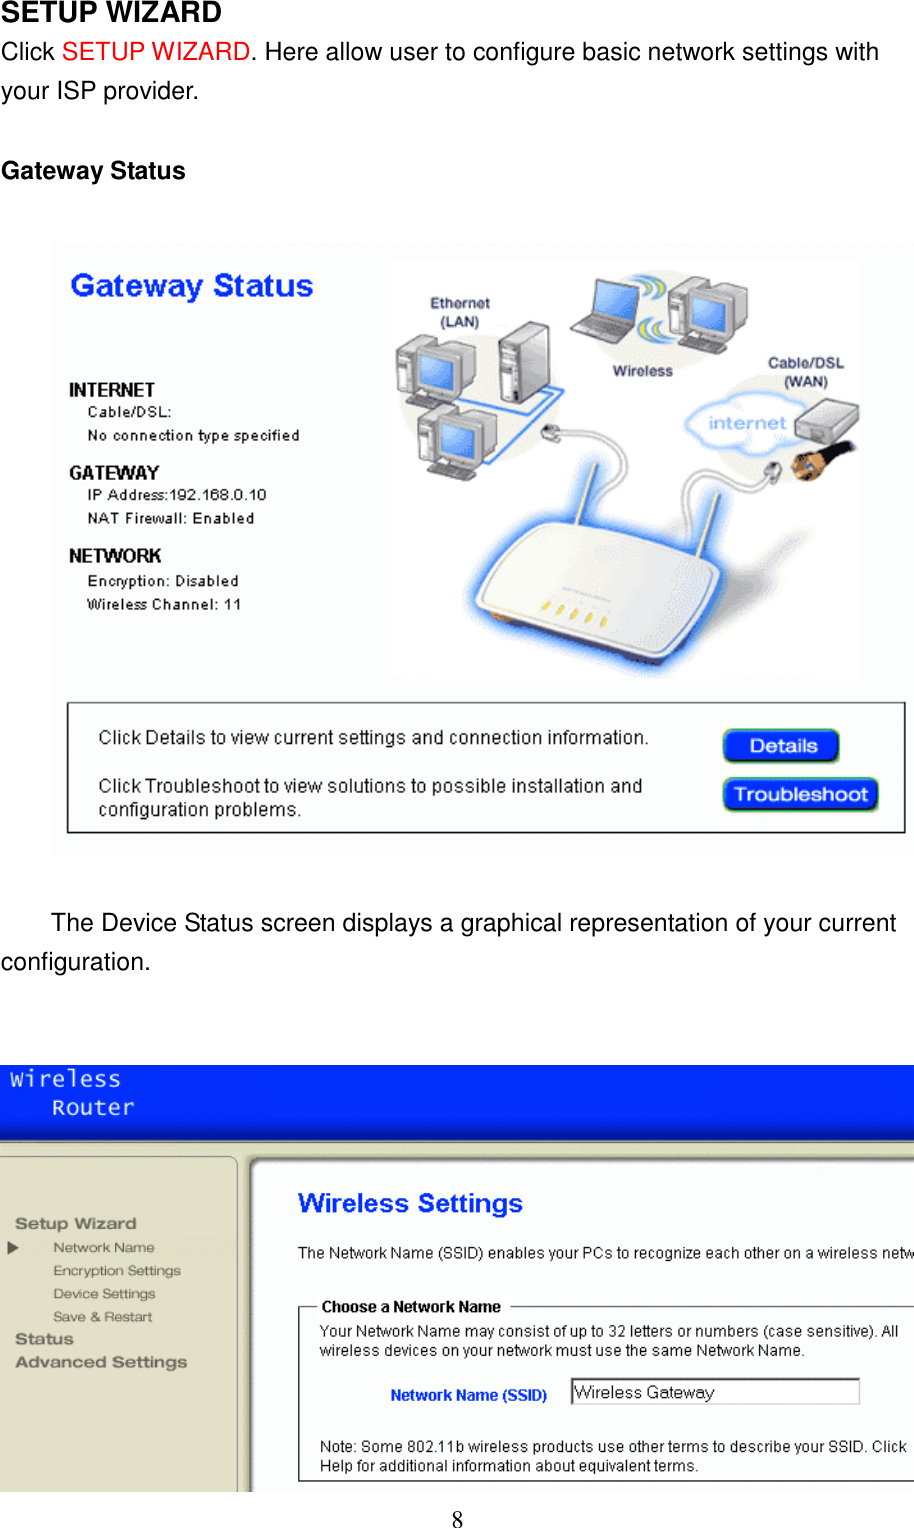 8SETUP WIZARDClick SETUP WIZARD. Here allow user to configure basic network settings withyour ISP provider.Gateway StatusThe Device Status screen displays a graphical representation of your currentconfiguration.